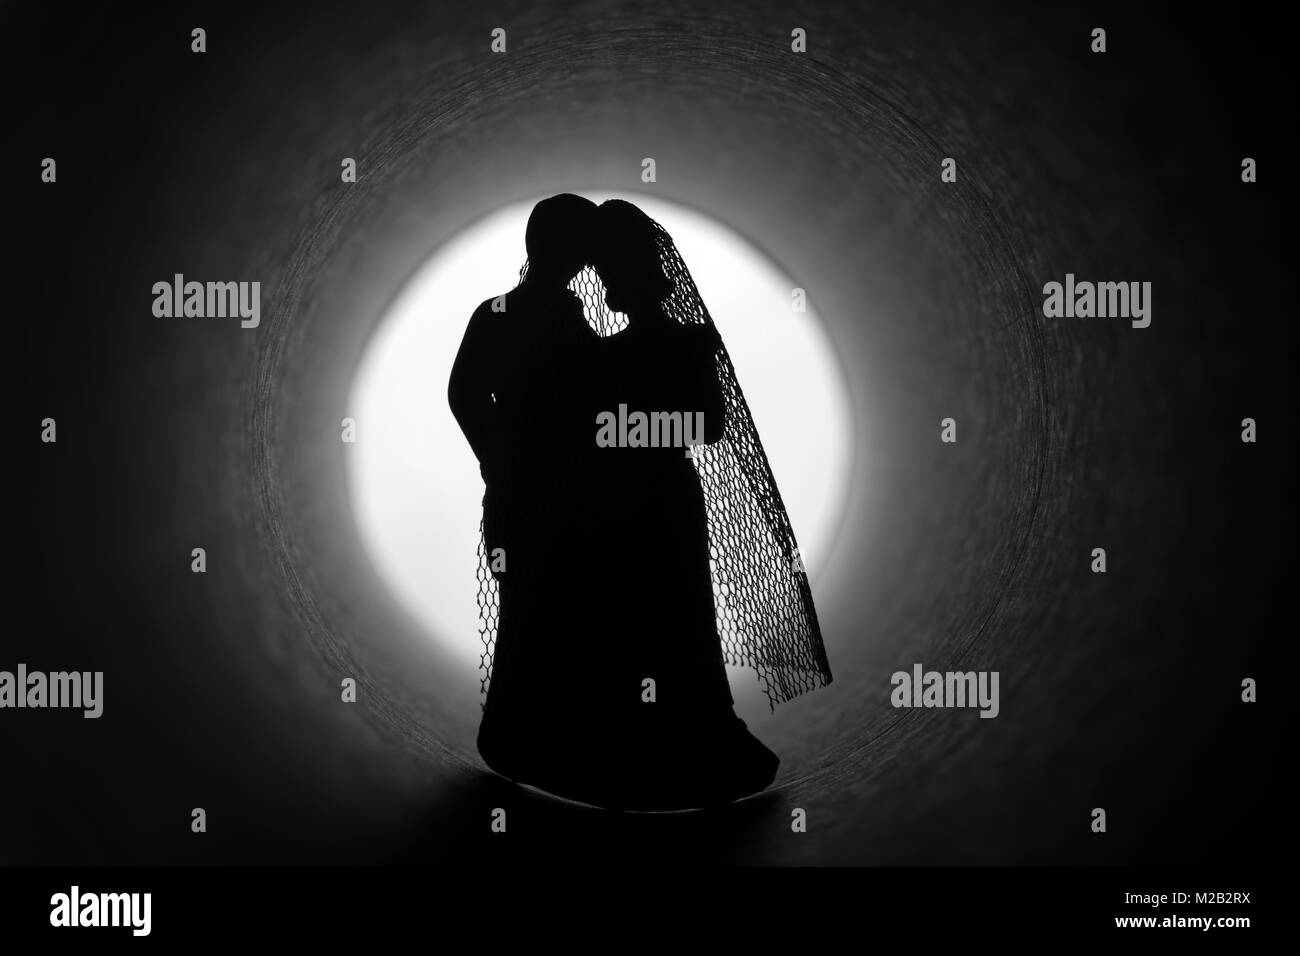 Marriage crisis. Bride and groom figures in a dark tunnel Stock Photo